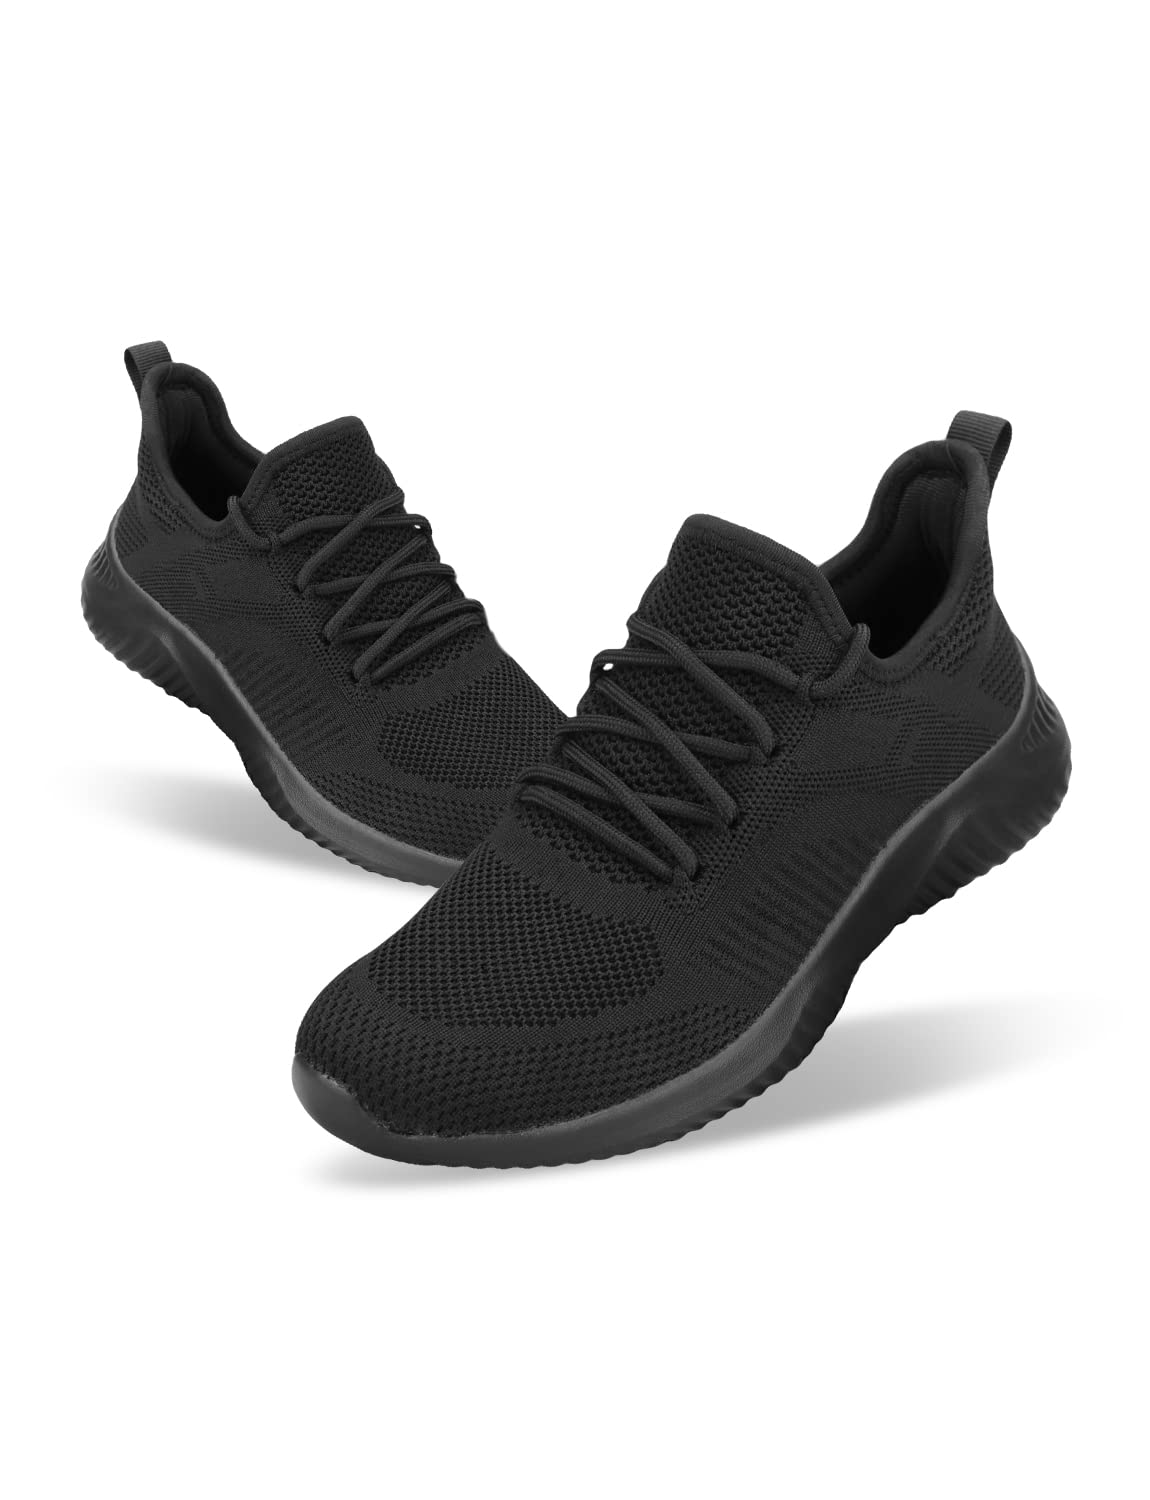 Slip On Sneakers for Women-Fashion Sneakers Walking Shoes Non Slip Lightweight Breathable Mesh Running Shoes Comfortable All Black 8.5